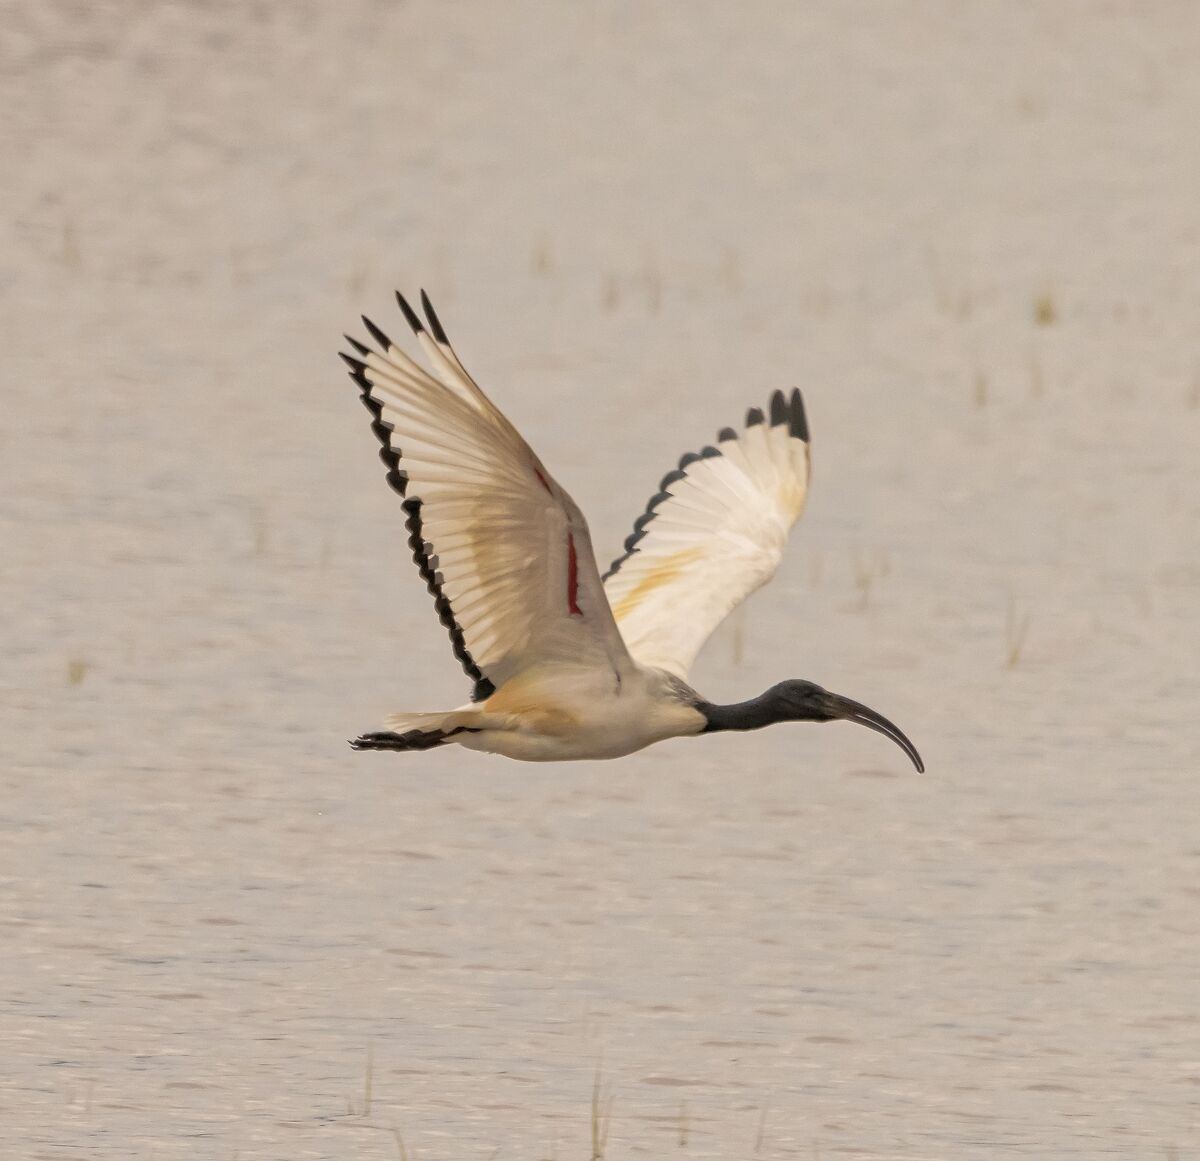 Sacred Ibis flying in the rice fields 30/04/2021...